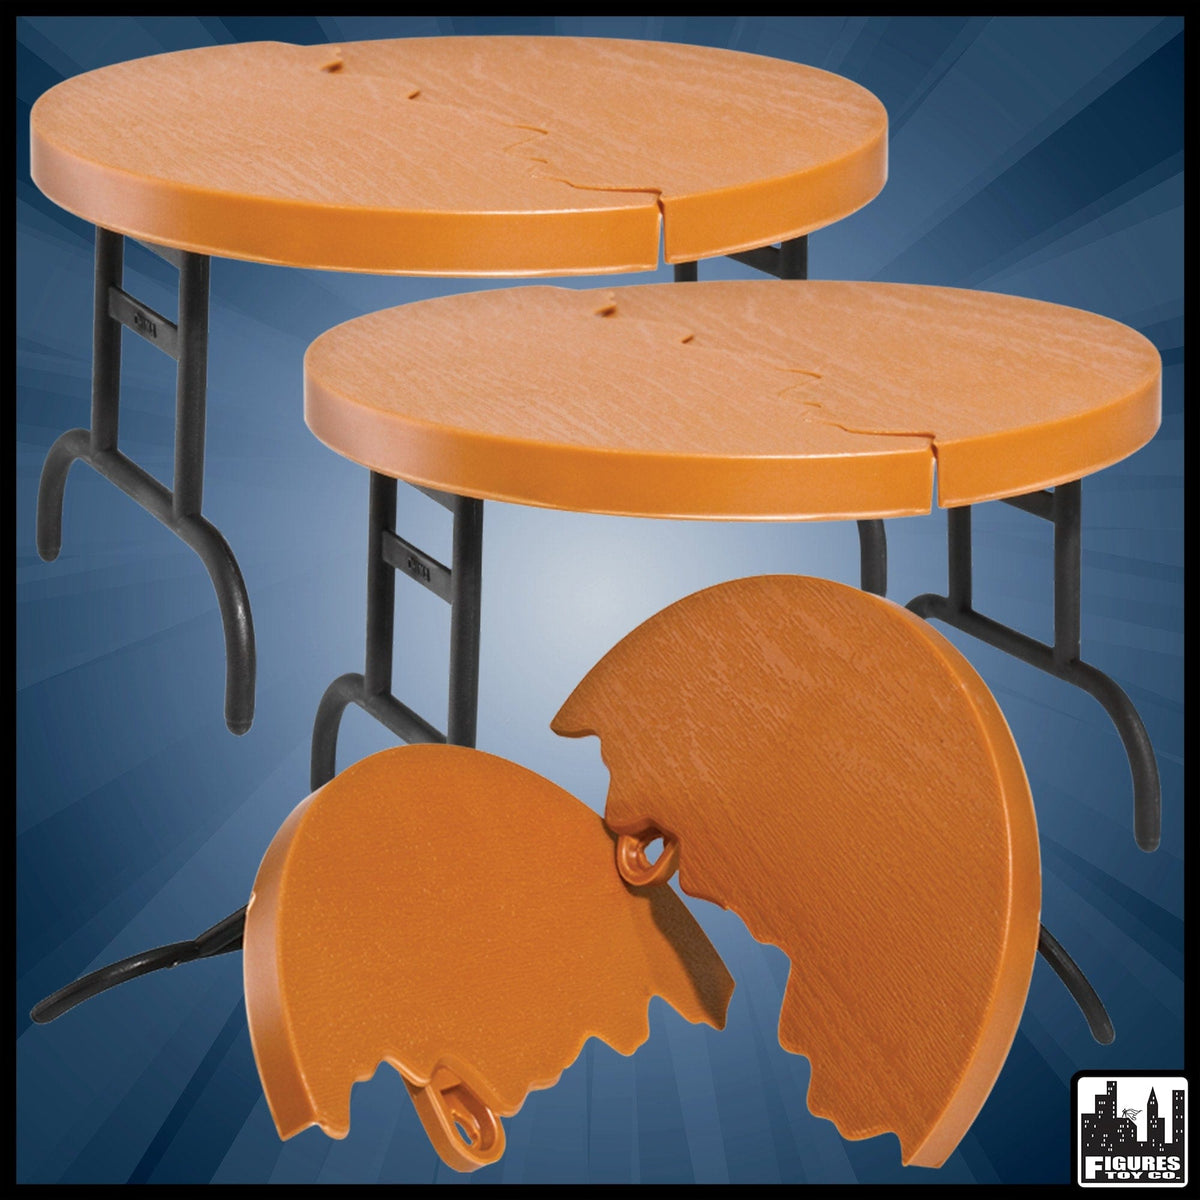 Set of 3 Wood Color Break Away Round Tables for WWE Wrestling Action Figures